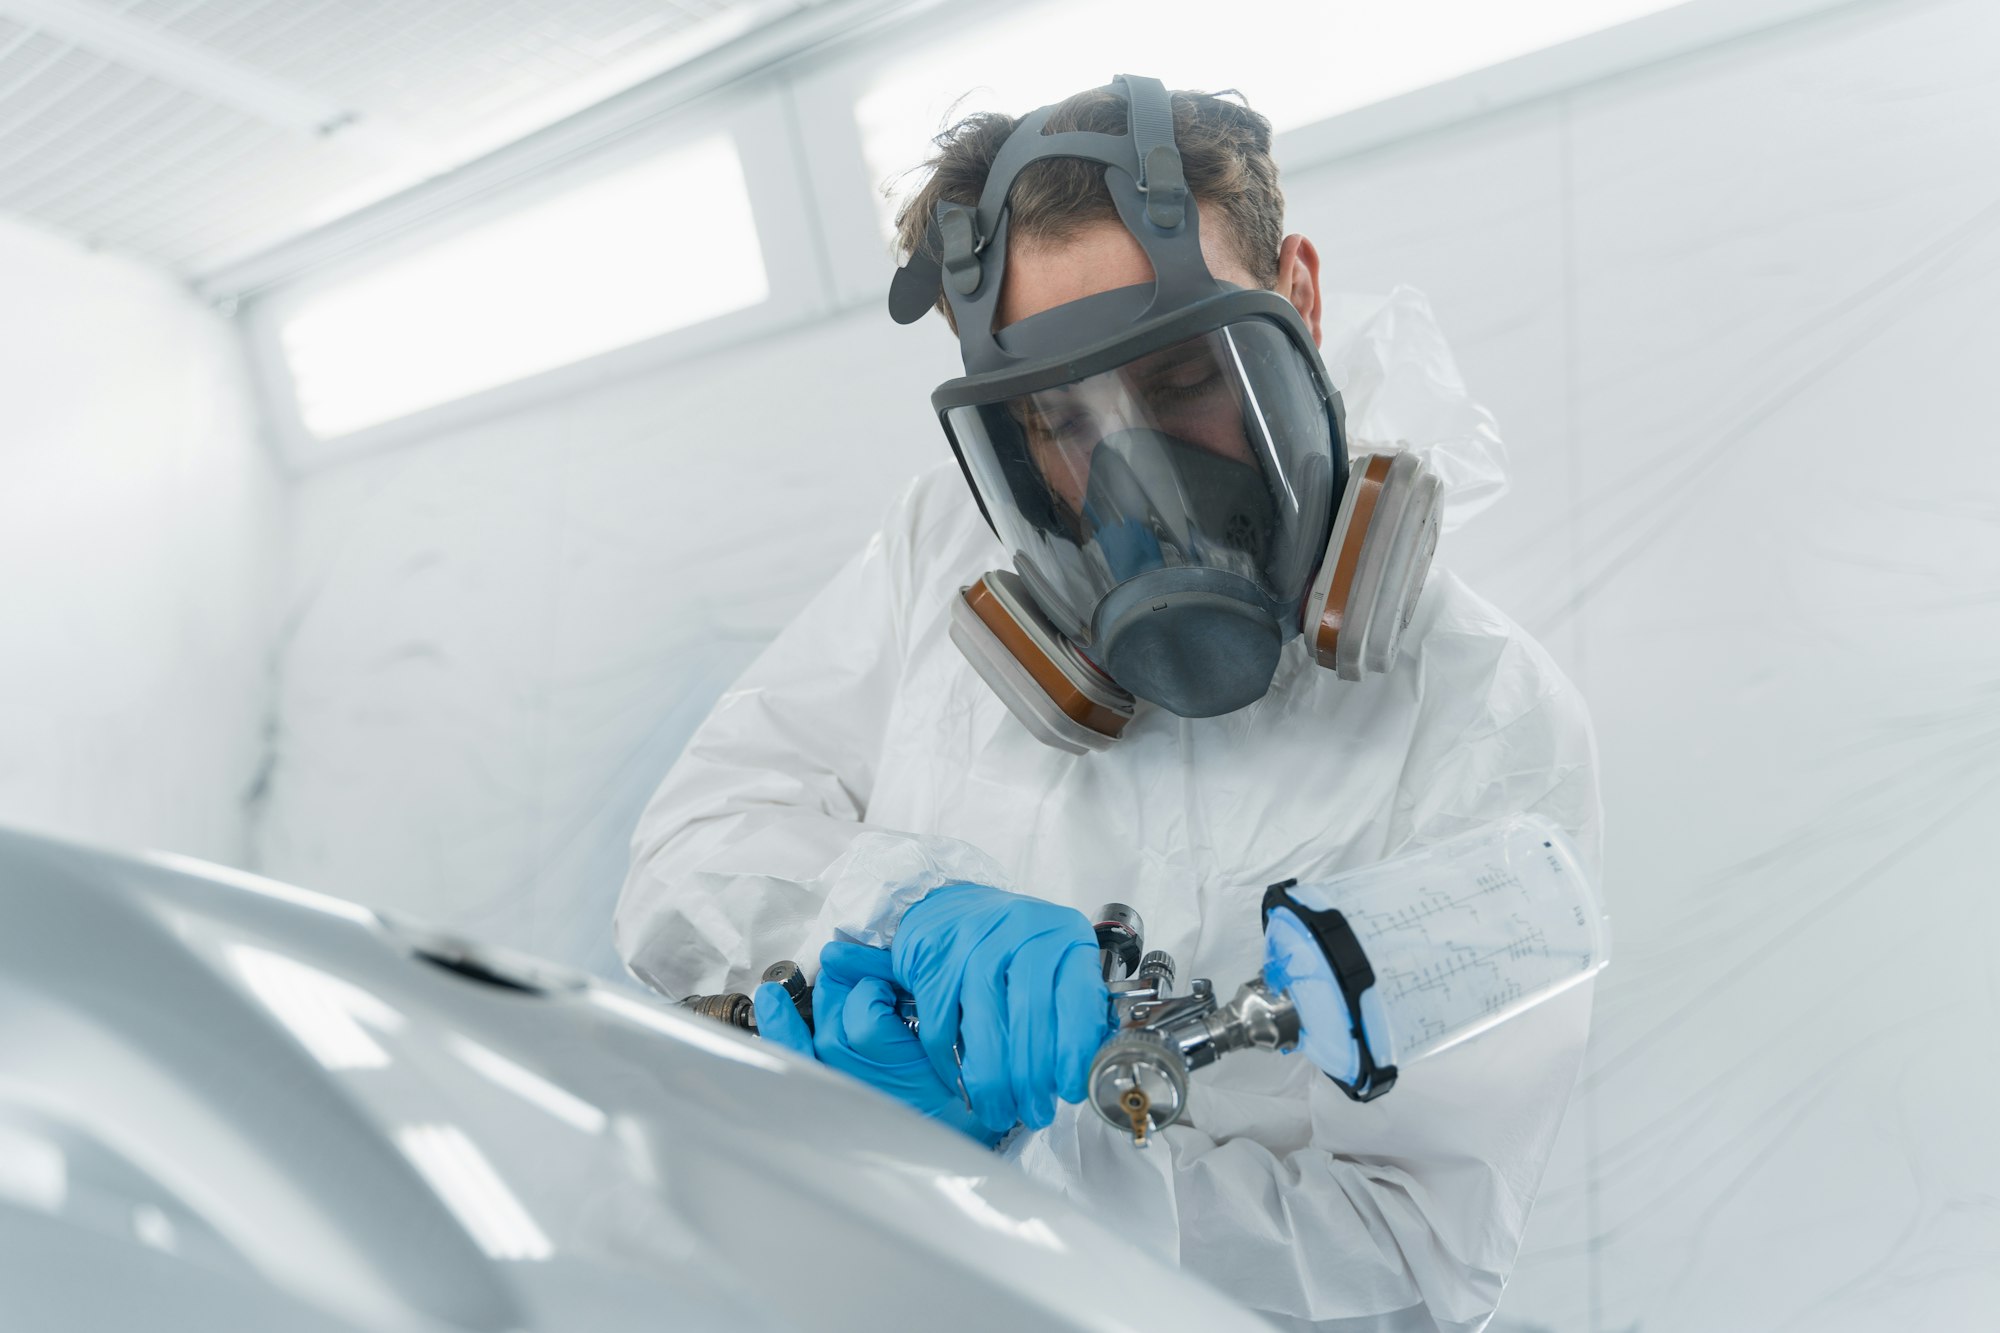 Auto service worker painting car element with spray gun in a paint chamber.